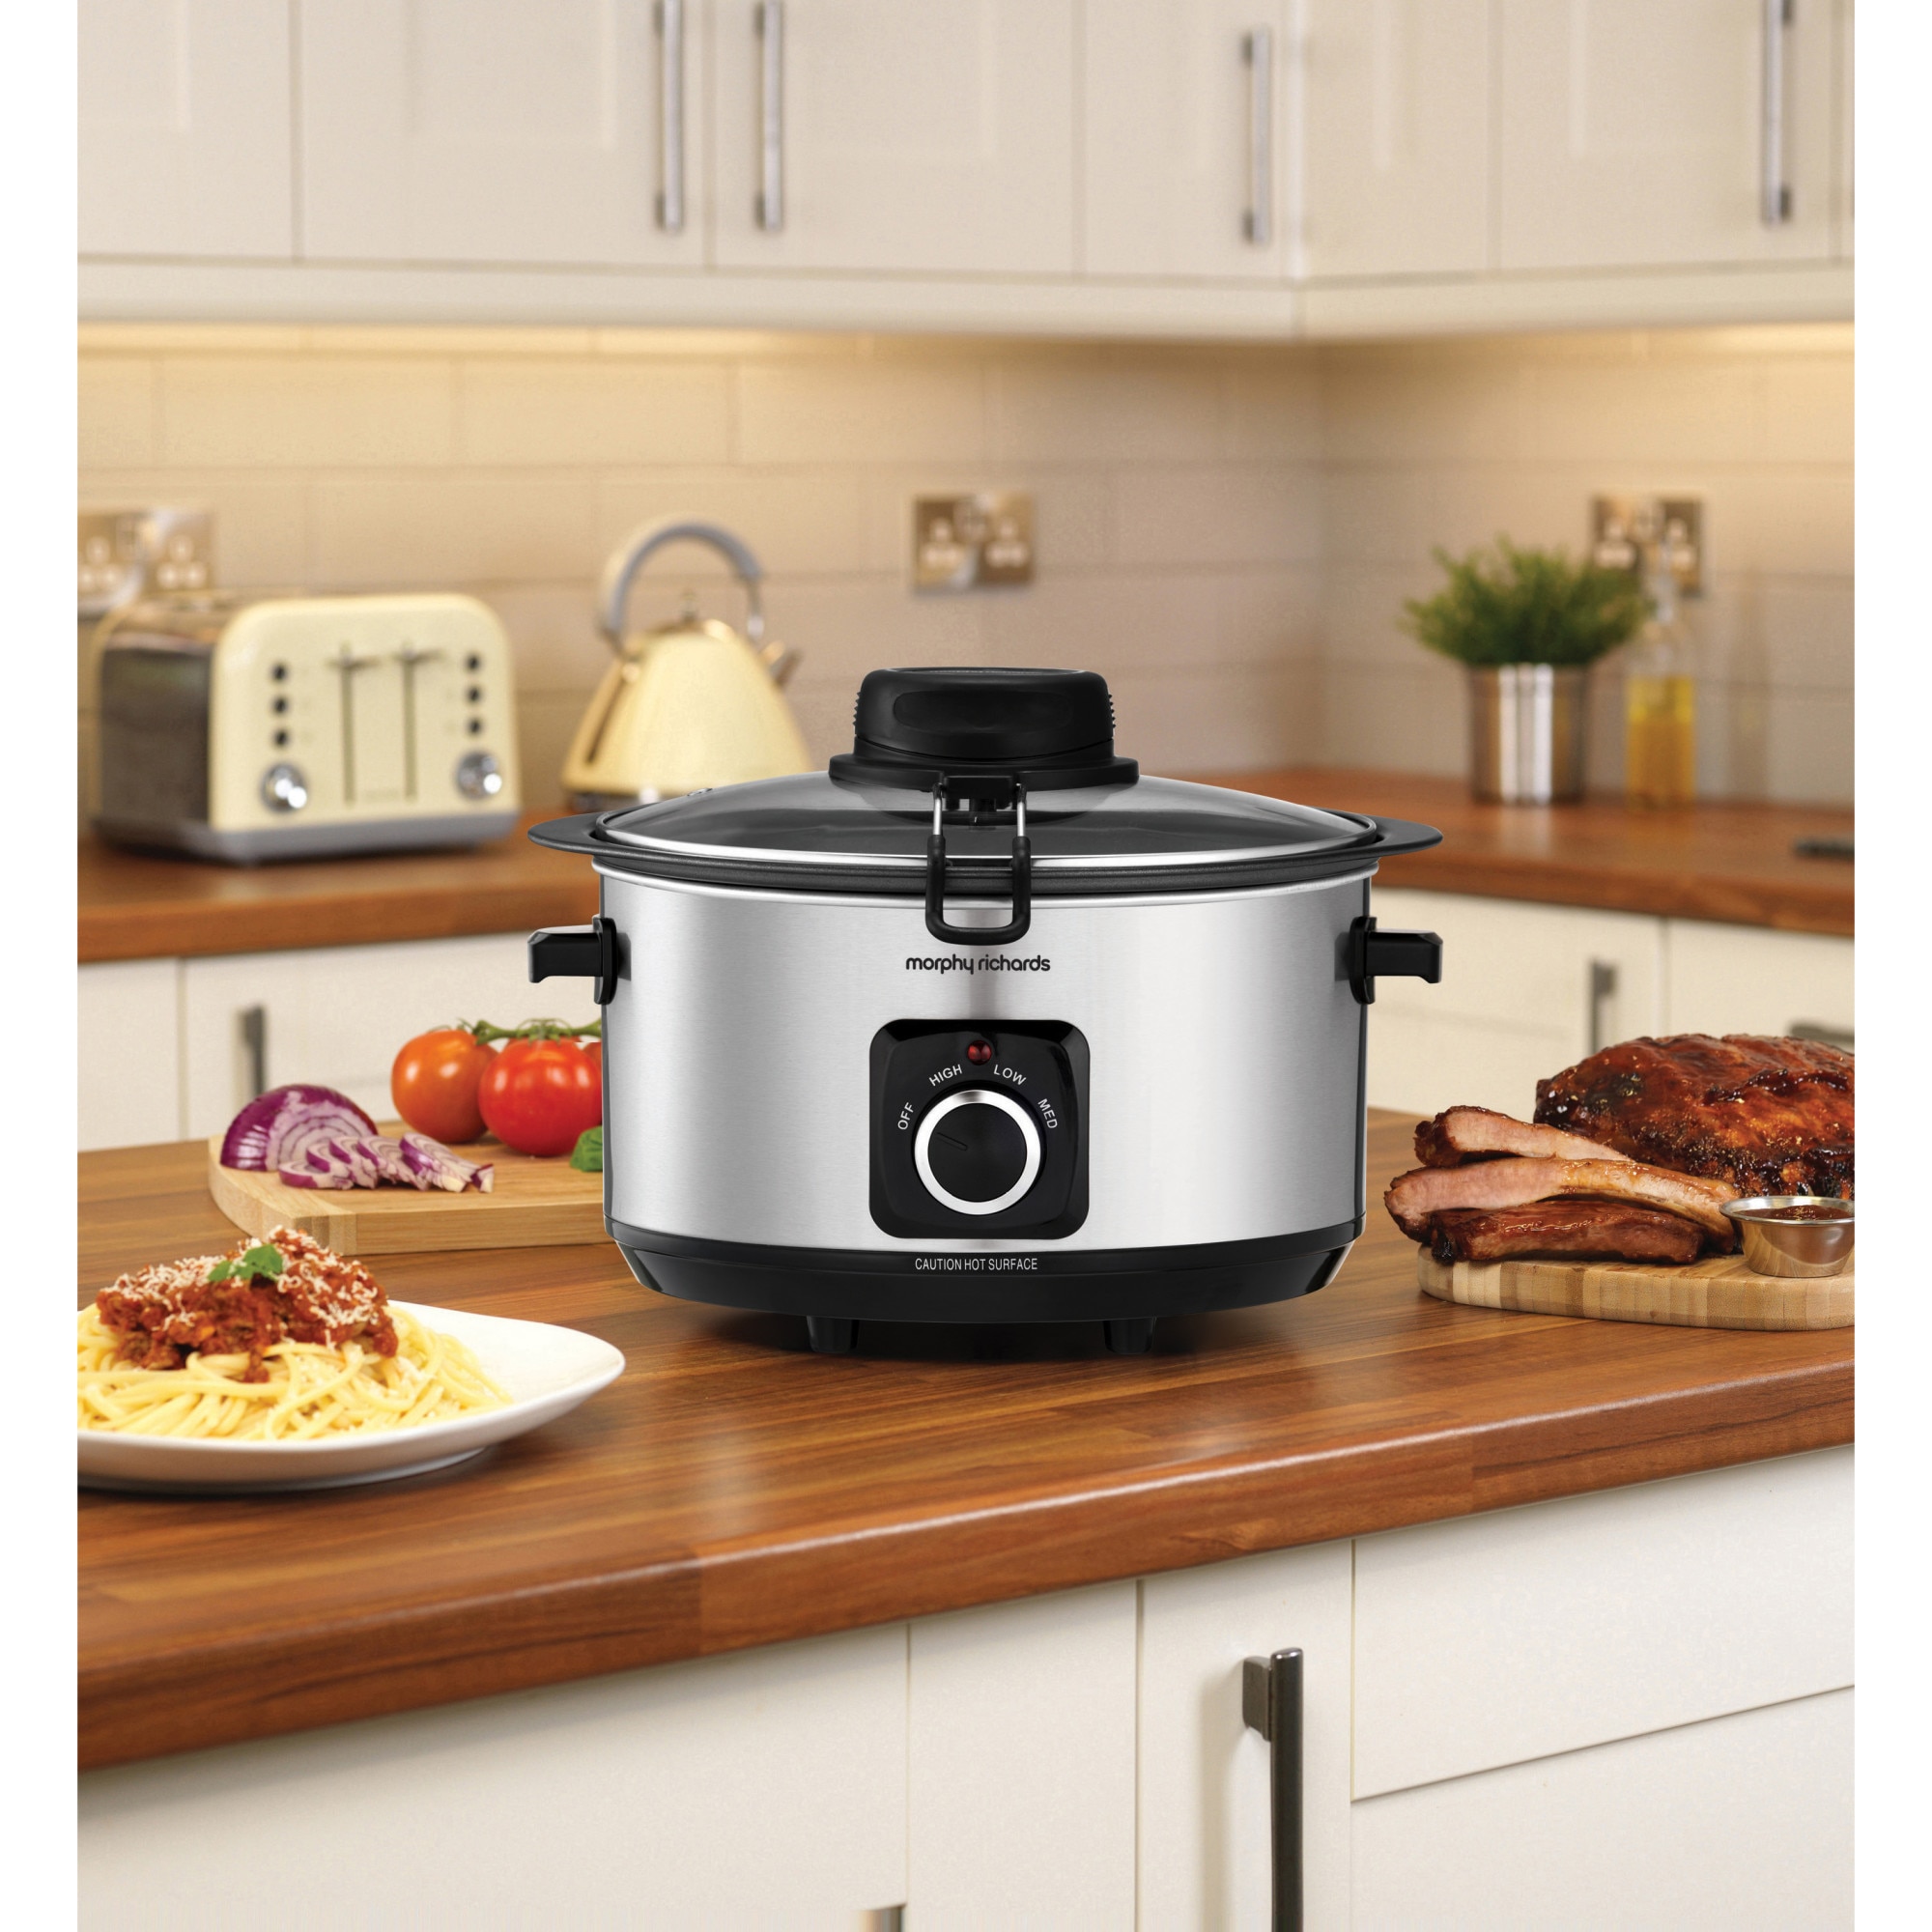 Buy Morphy Richards 6.5L Auto-Stir Slow Cooker - Stainless Steel